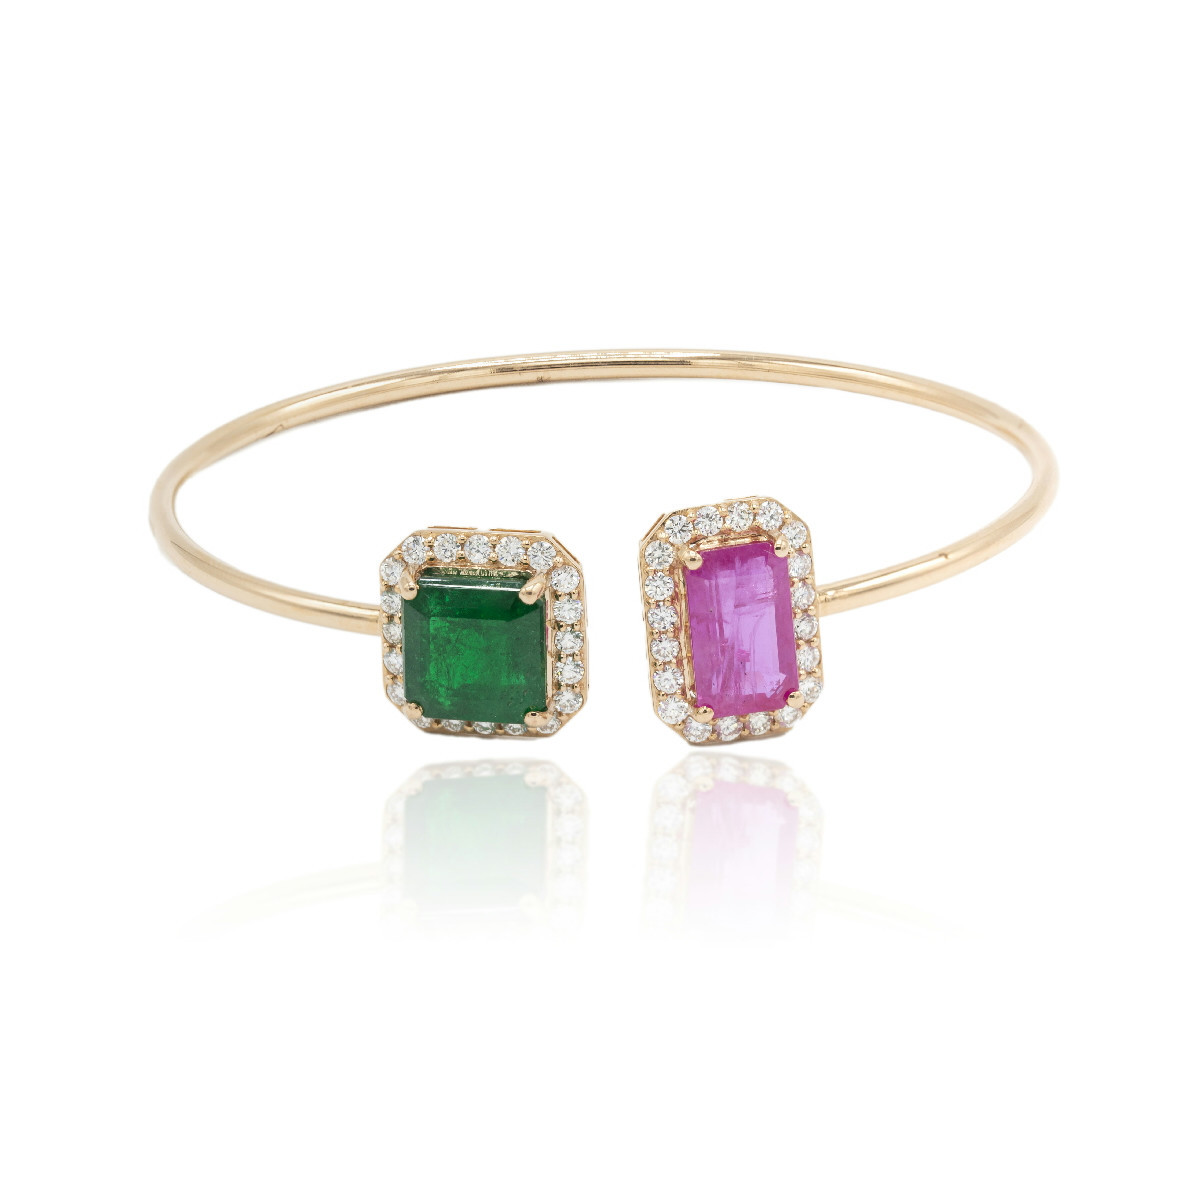 Bracelet emerald and ruby